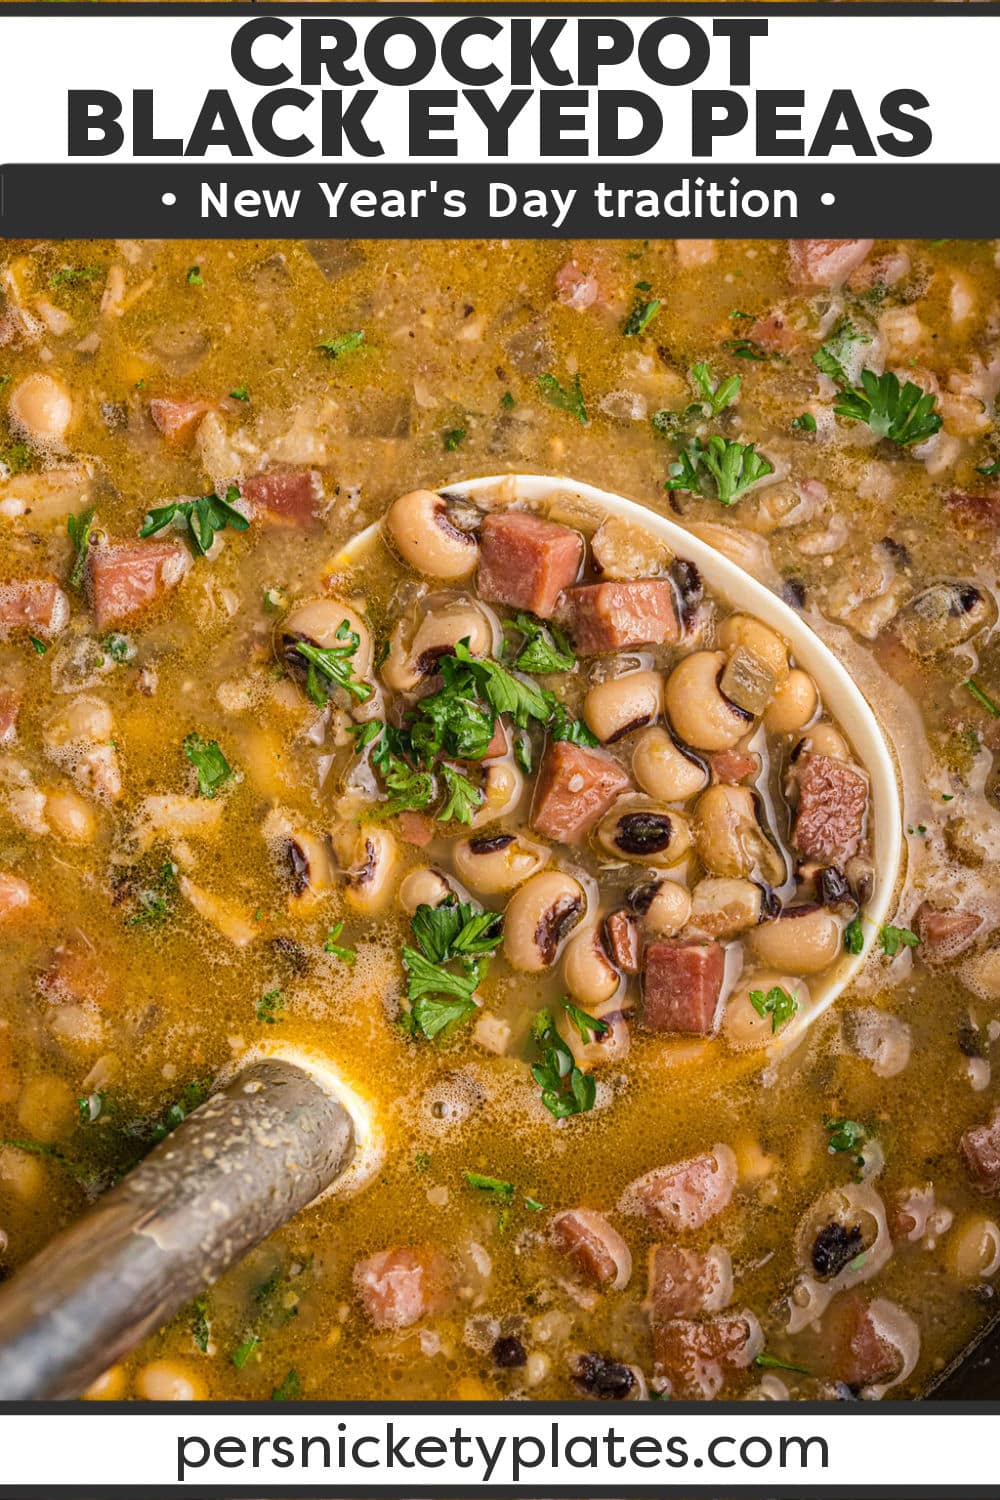 It’s easier than ever to make this classic Slow Cooker Black Eyed Peas for New Year’s this year! Dump dried peas into the crockpot, pour in all of the remaining ingredients, including ham, bacon, broth, and plenty of seasoning, and let the slow cooker do the rest. The results are buttery textures and savory and smoky flavors in a comfort food recipe to start your year off right! | www.persnicketyplates.com